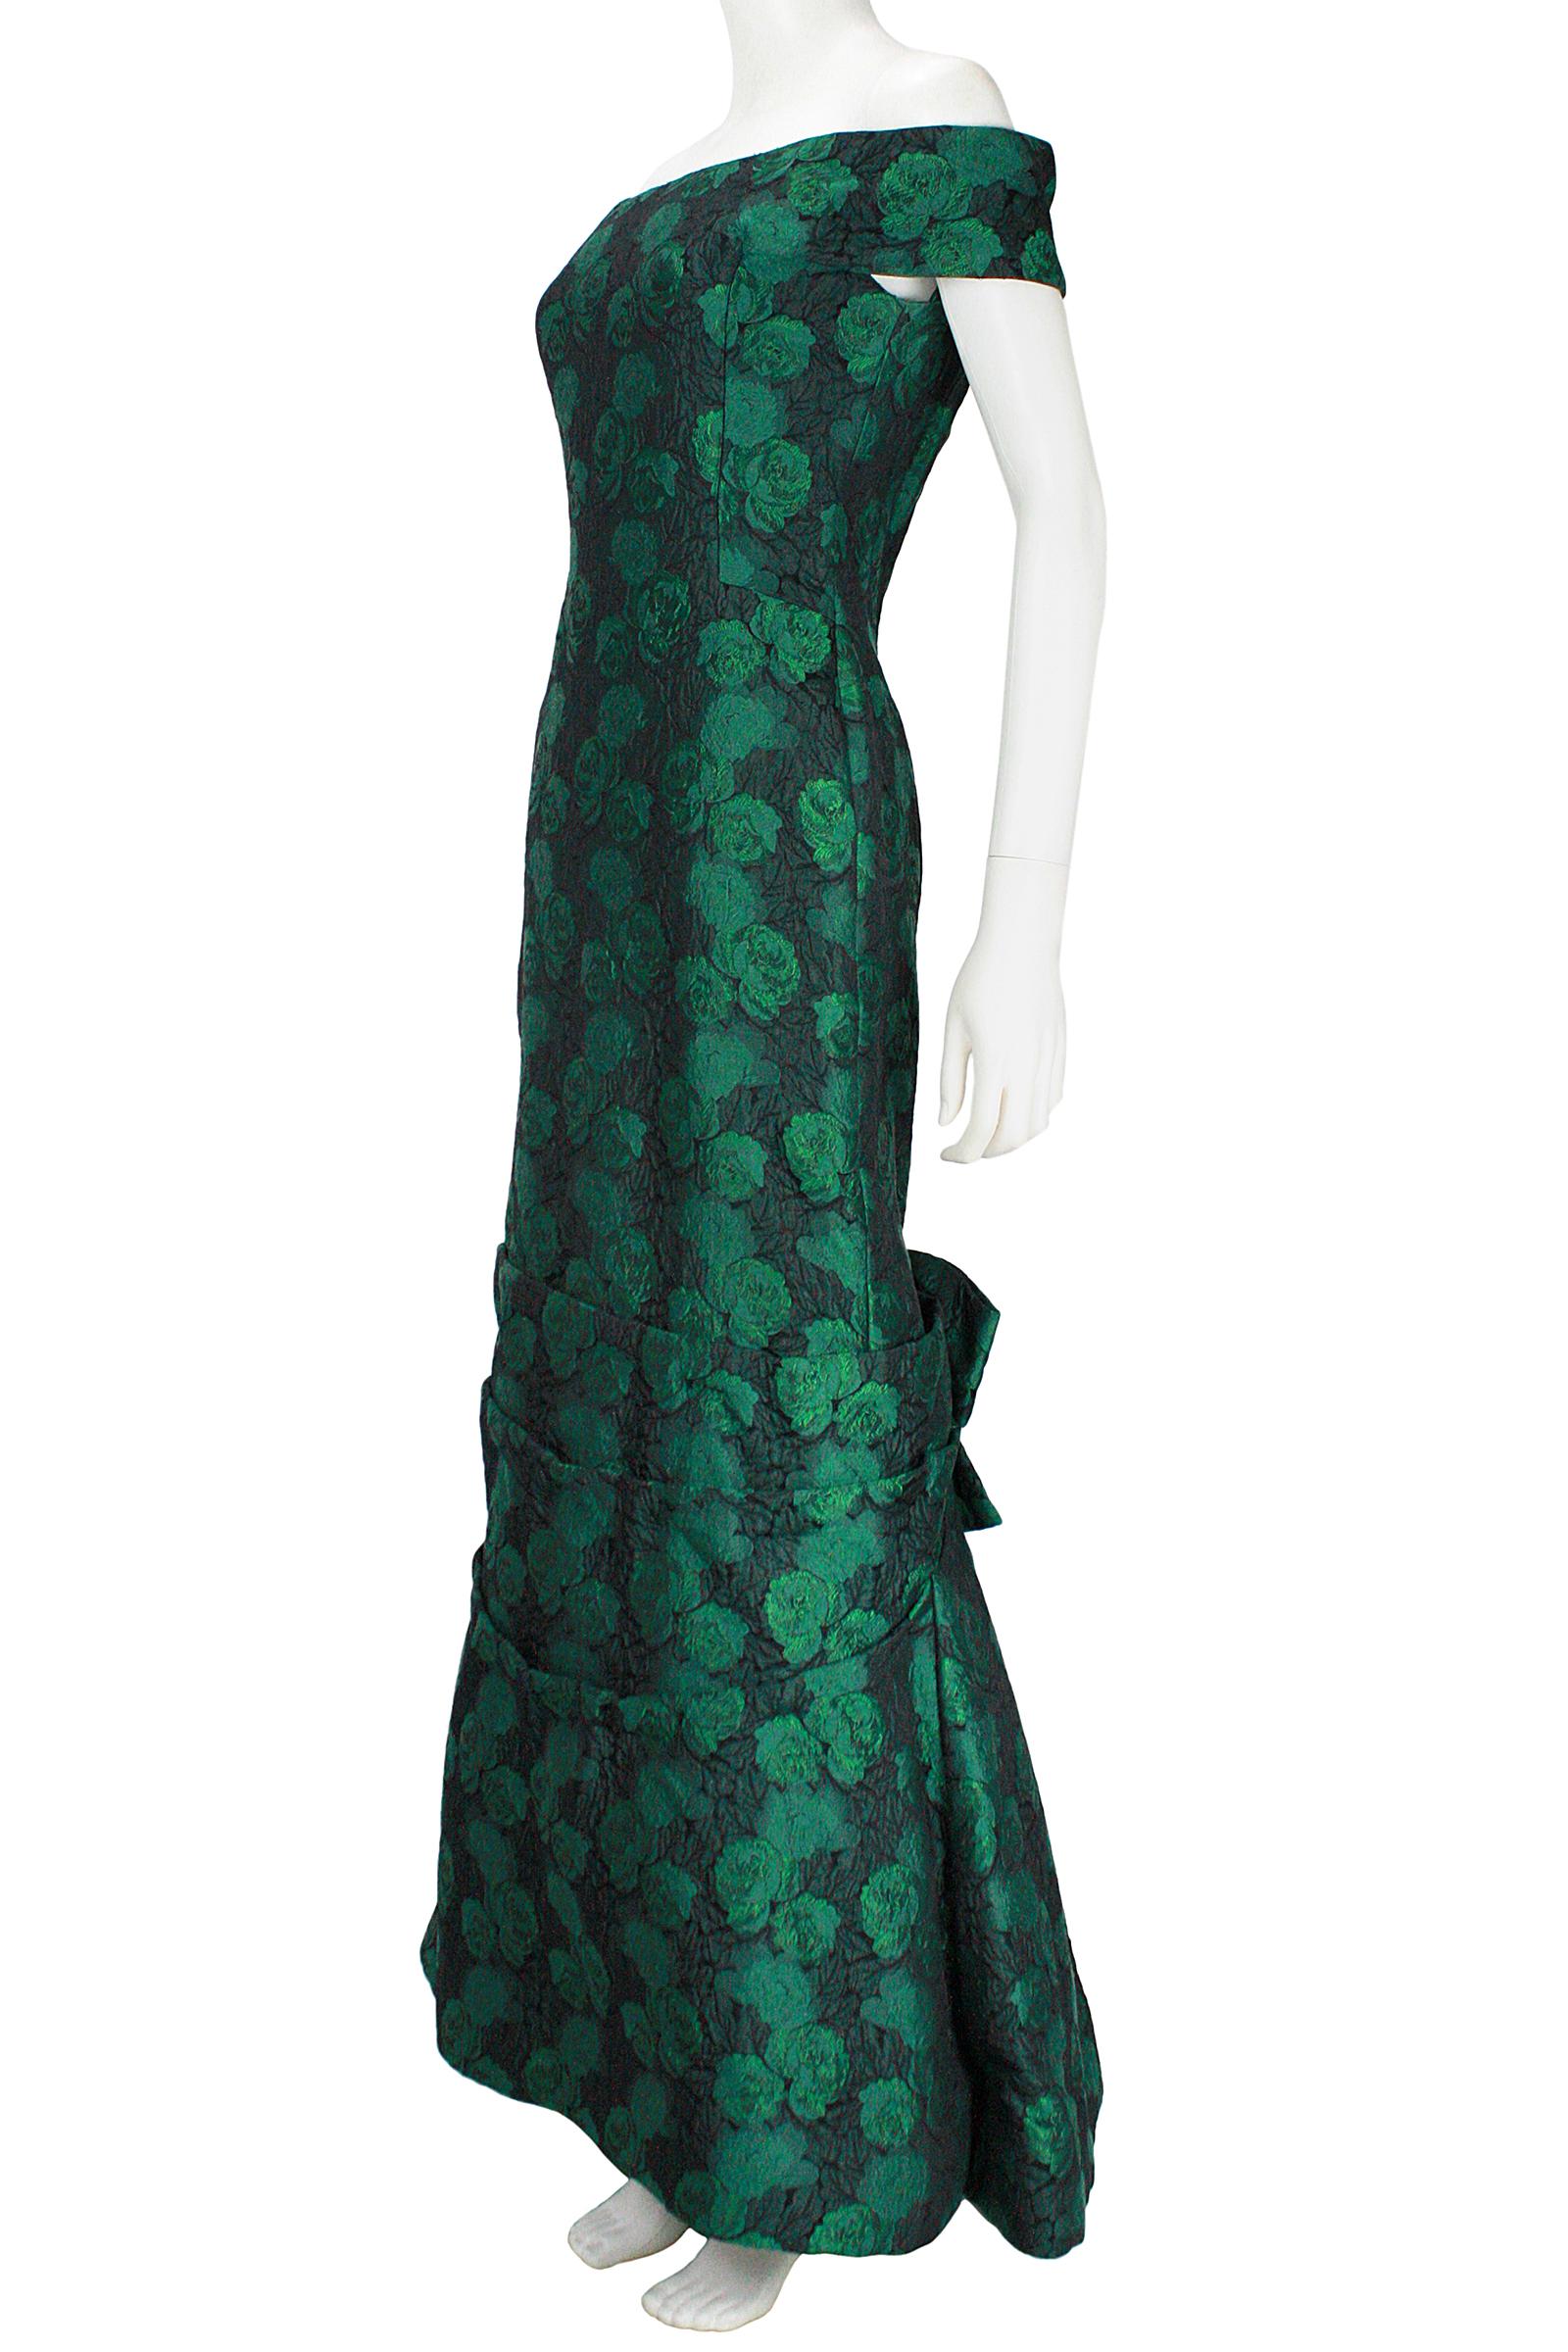 1980s Scaasi Off The Shoulder Green & Black Floral Brocade Gown with Jacket For Sale 2